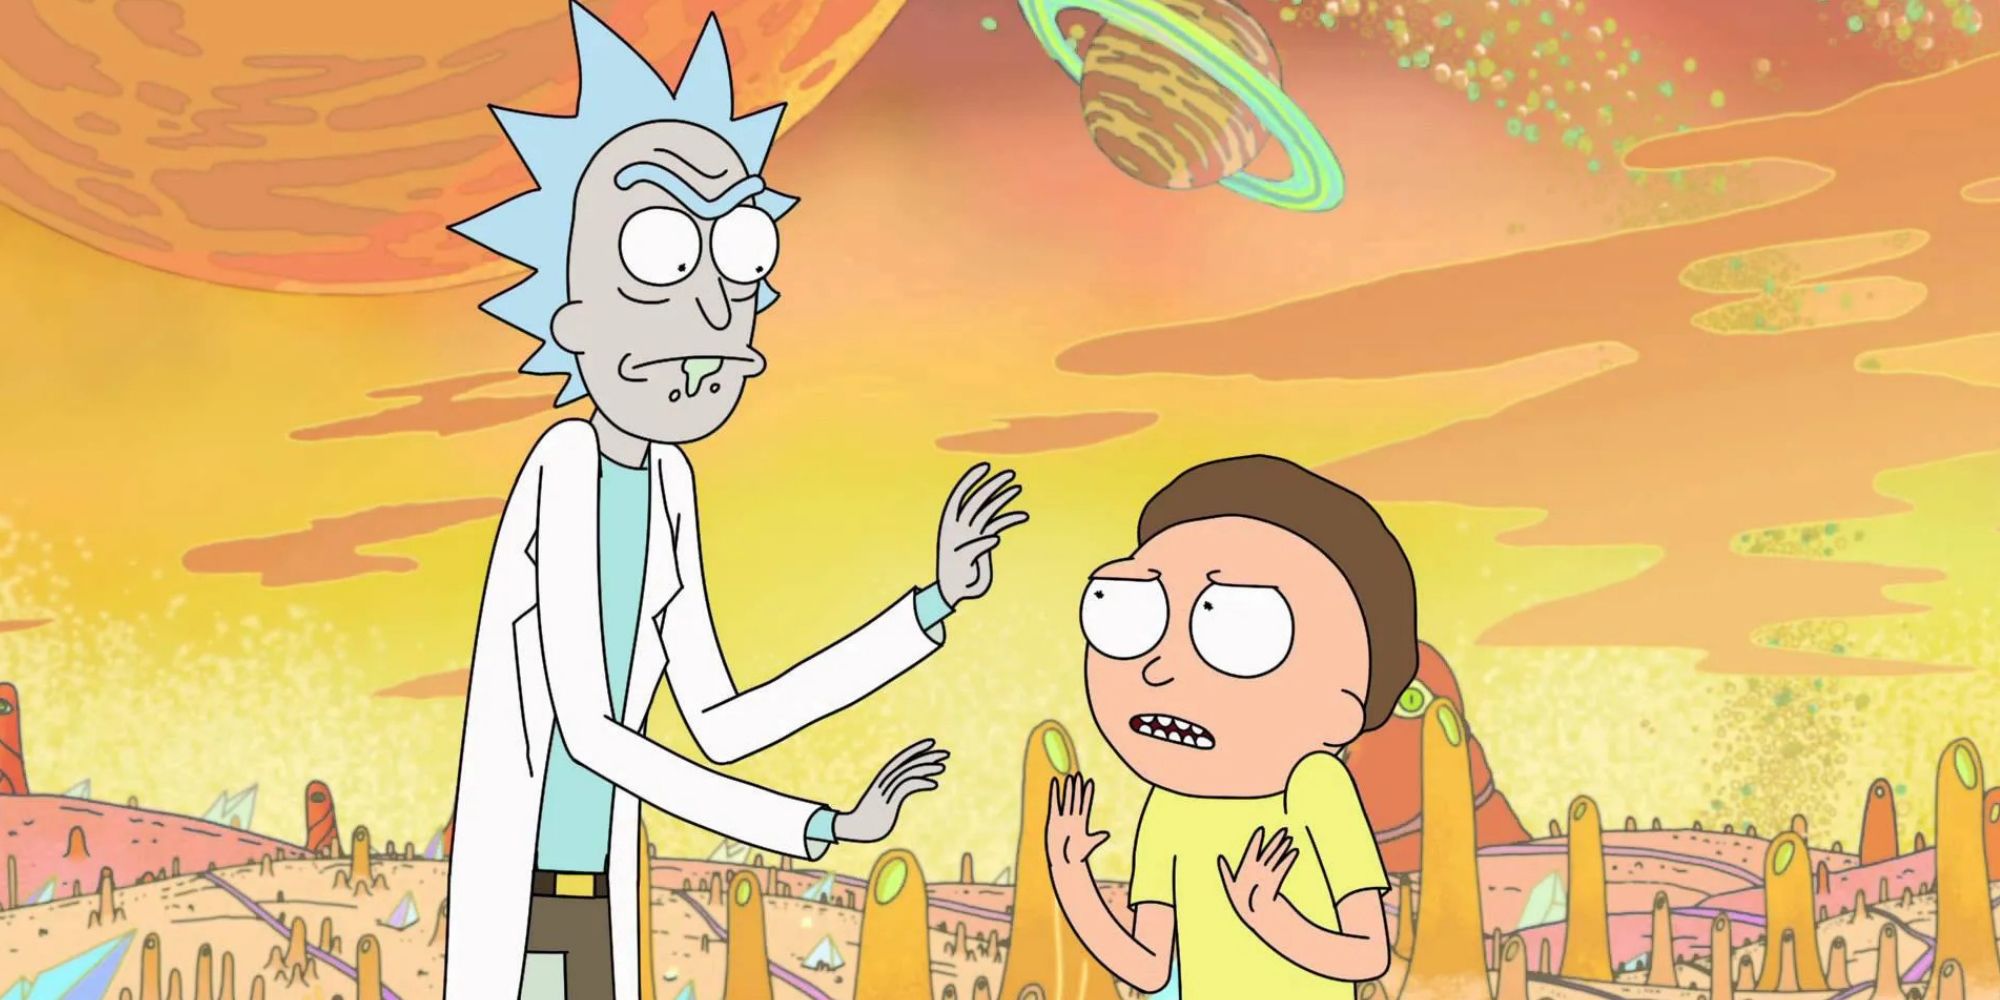 Rick and Morty argue on an alien planet